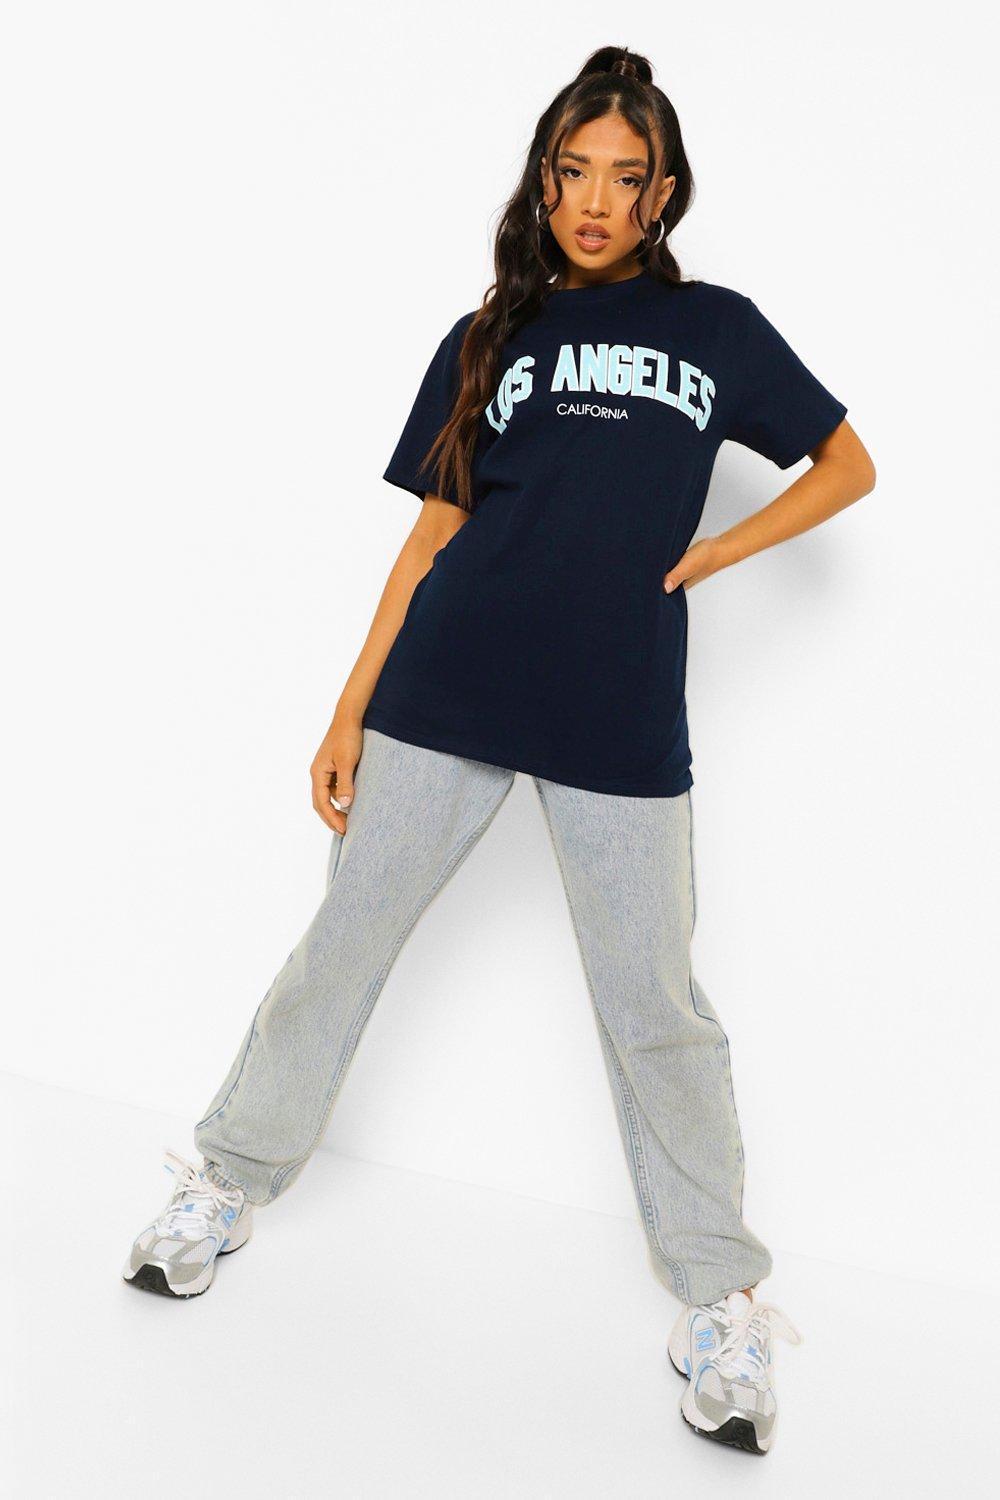 Women's 99 Los Angeles Baby T-Shirt in Navy - Size XS